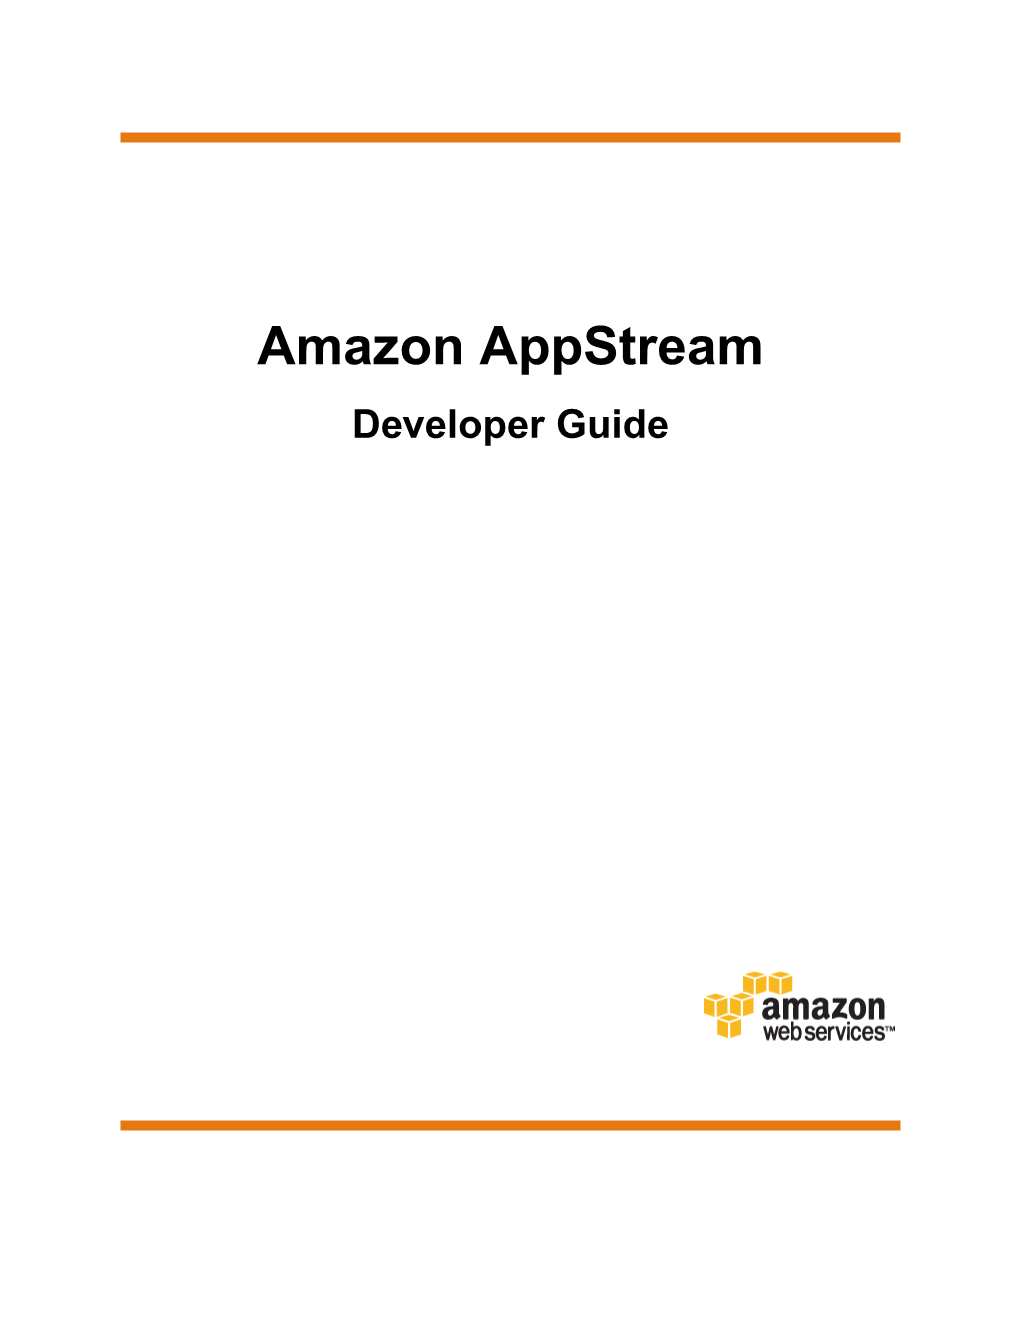 What Is Amazon Appstream?